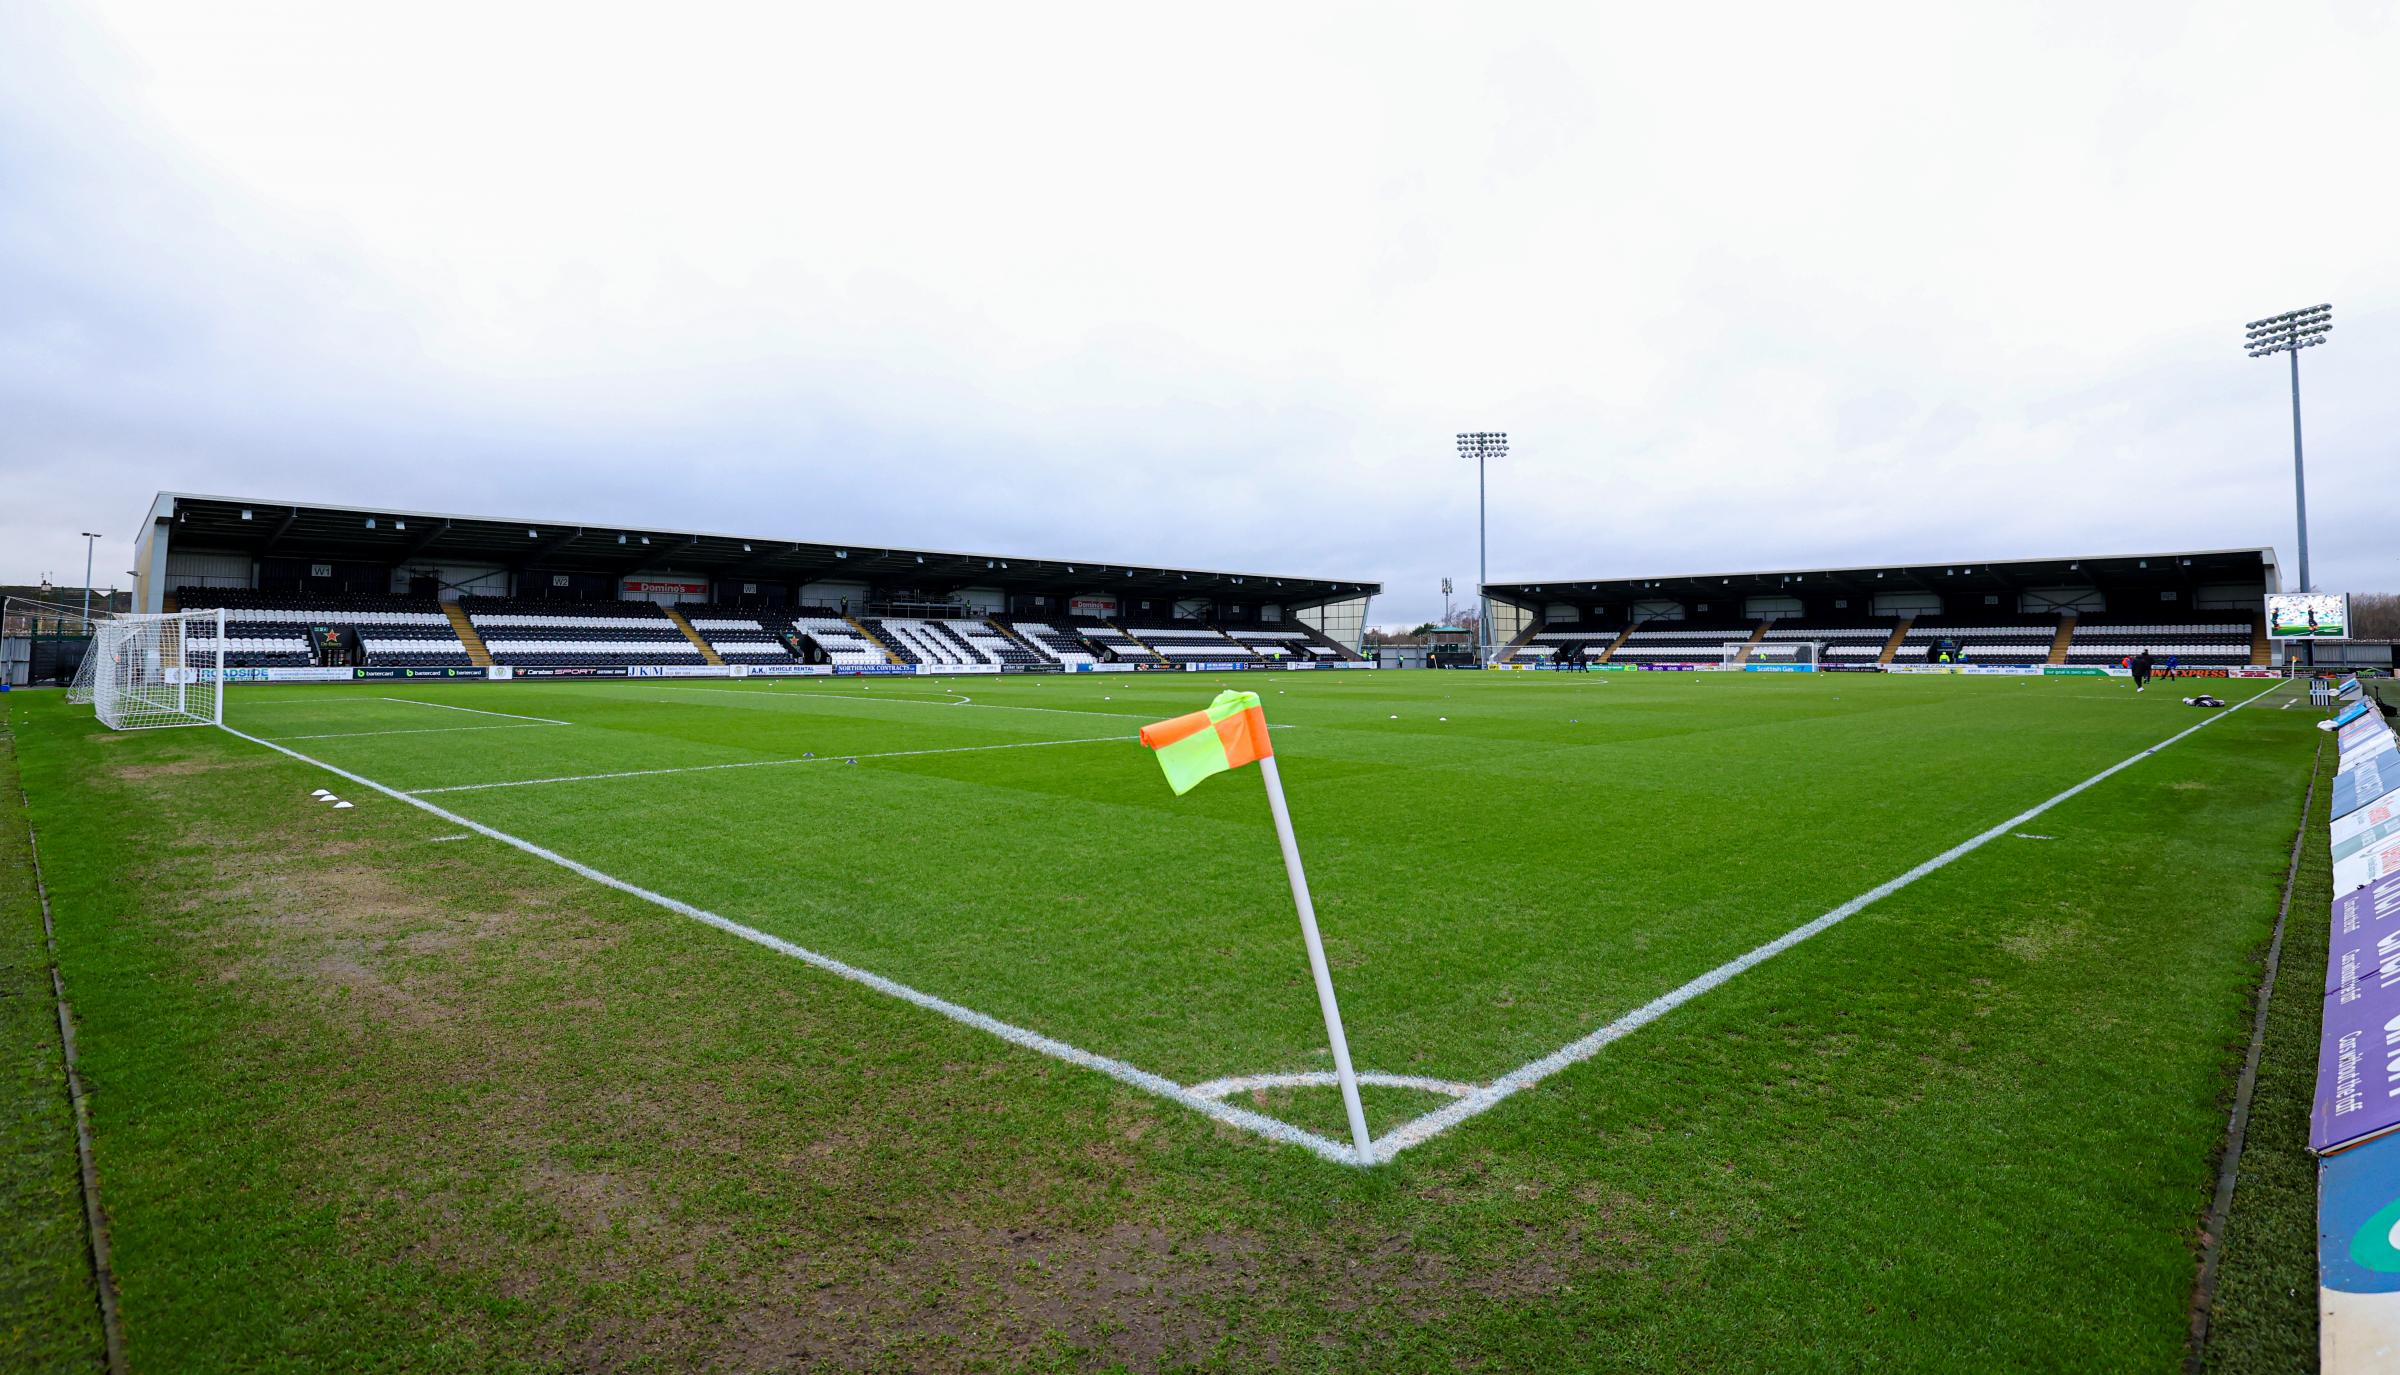 St Mirren vs Dundee kick-off delayed as team bus stuck in traffic